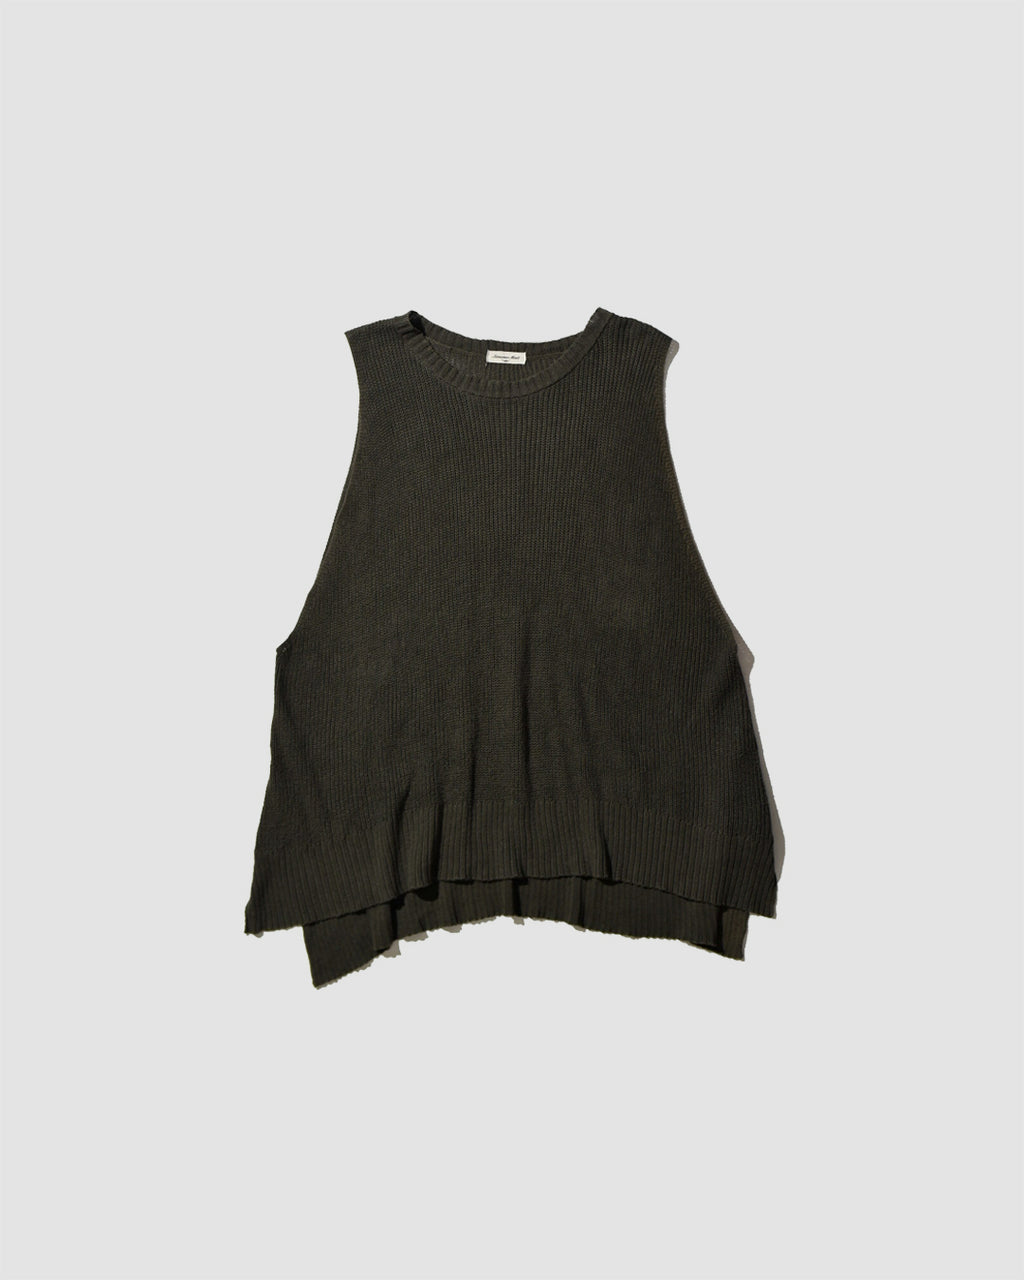 KNITTED OLIVE GREEN SLEEVELESS TOP - FREESIZE